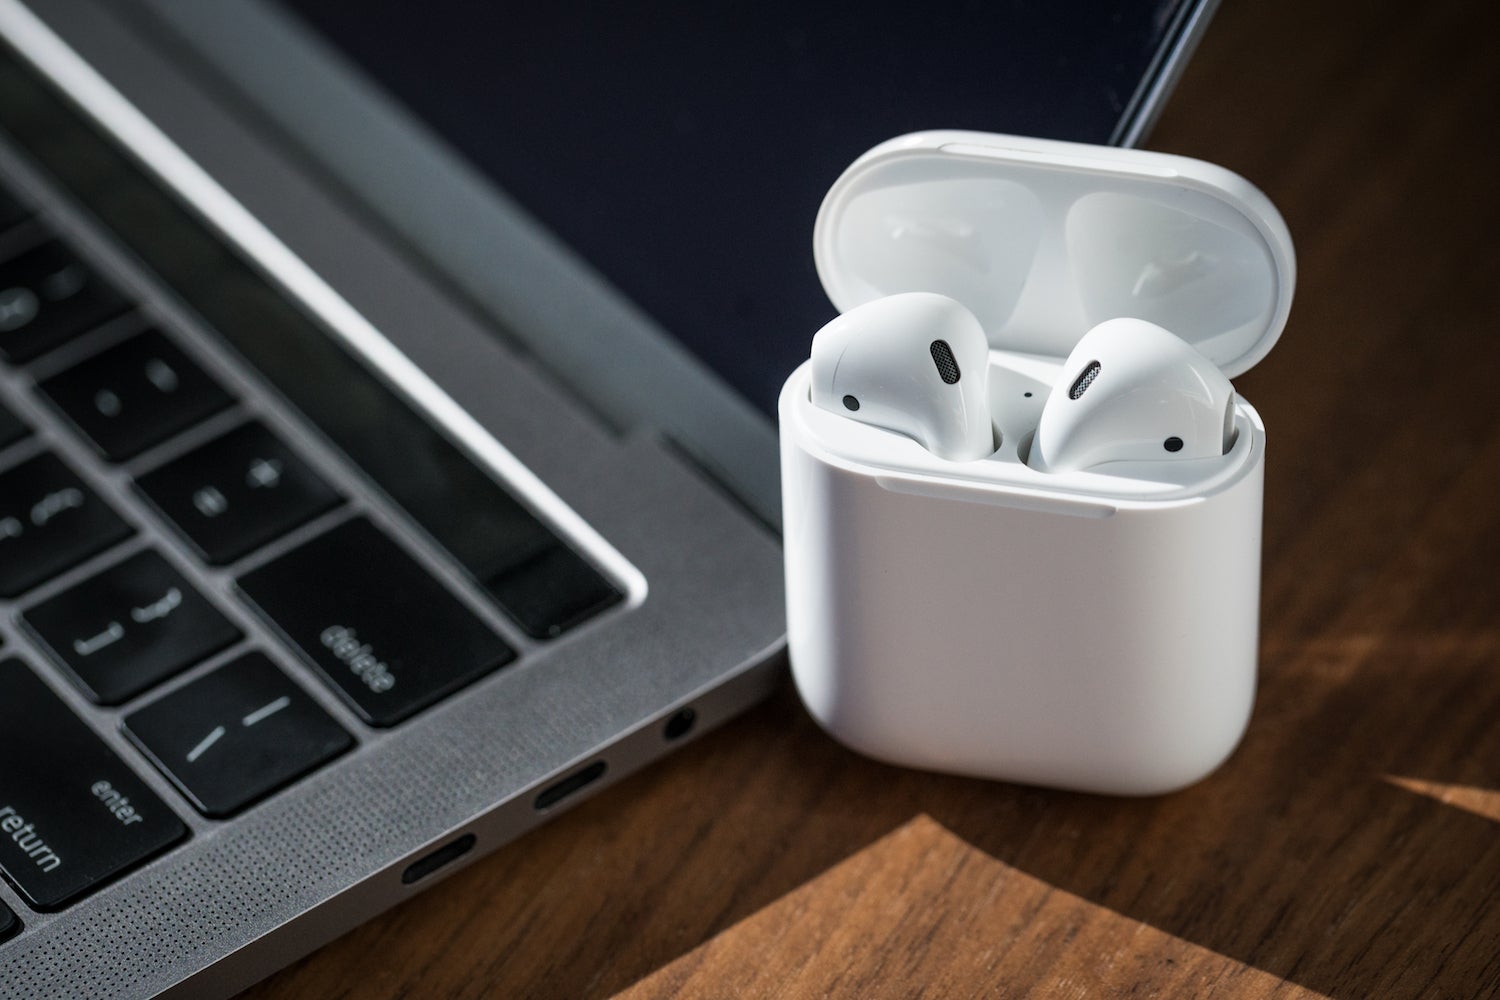 AirPods review: They sound great, but Siri holds them back